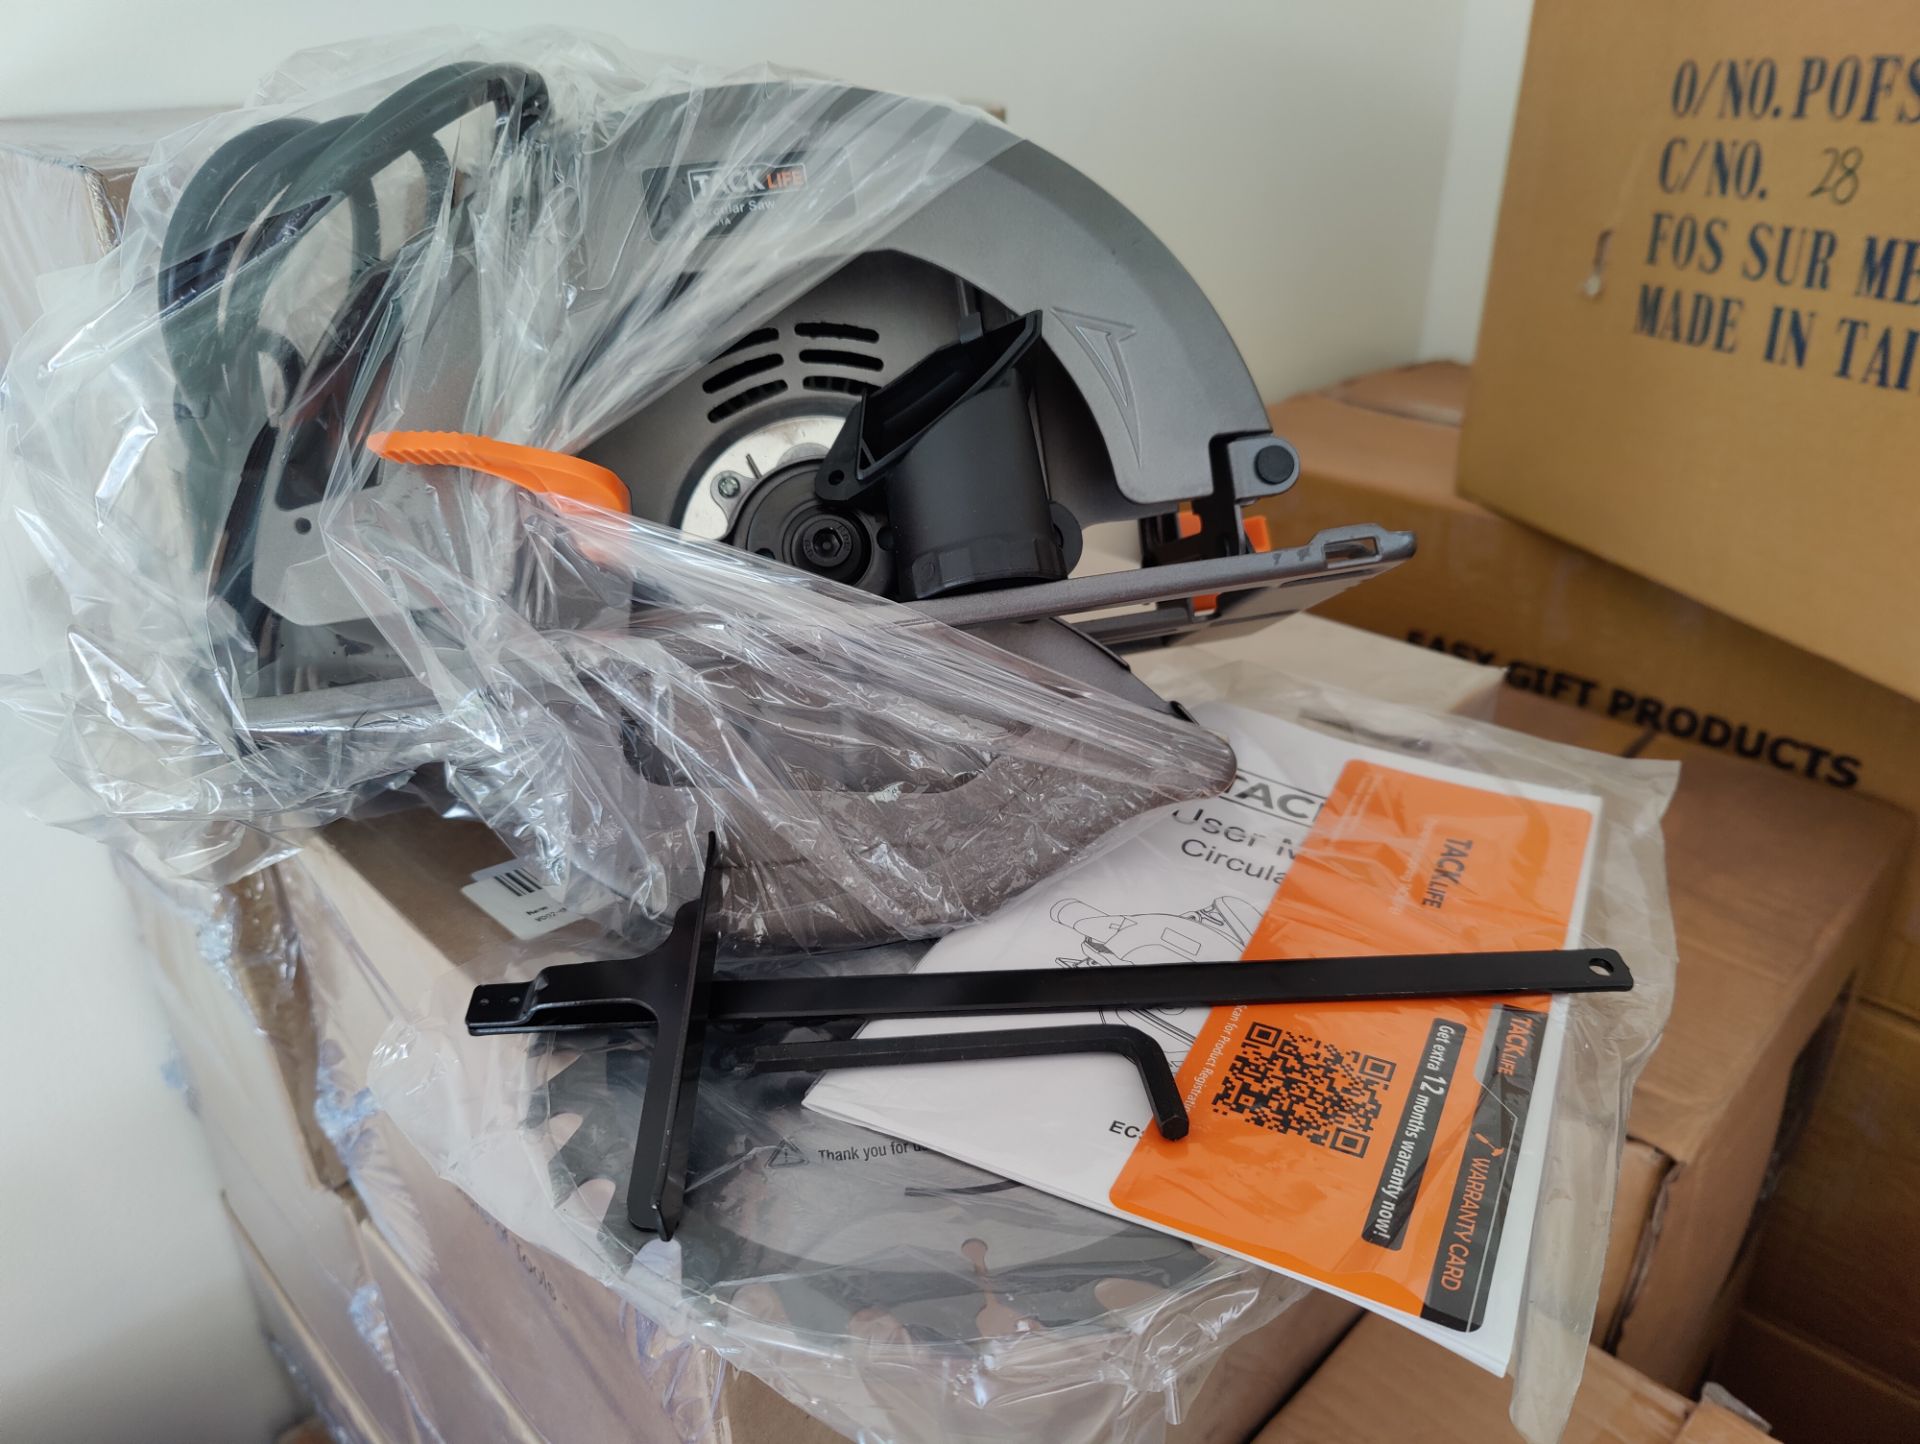 2 x Trade Lot New Boxed Tacklife Electric Circular Saw,1500W, 5000 RPM With Bevel Cuts 2-3/5' - Bild 4 aus 4